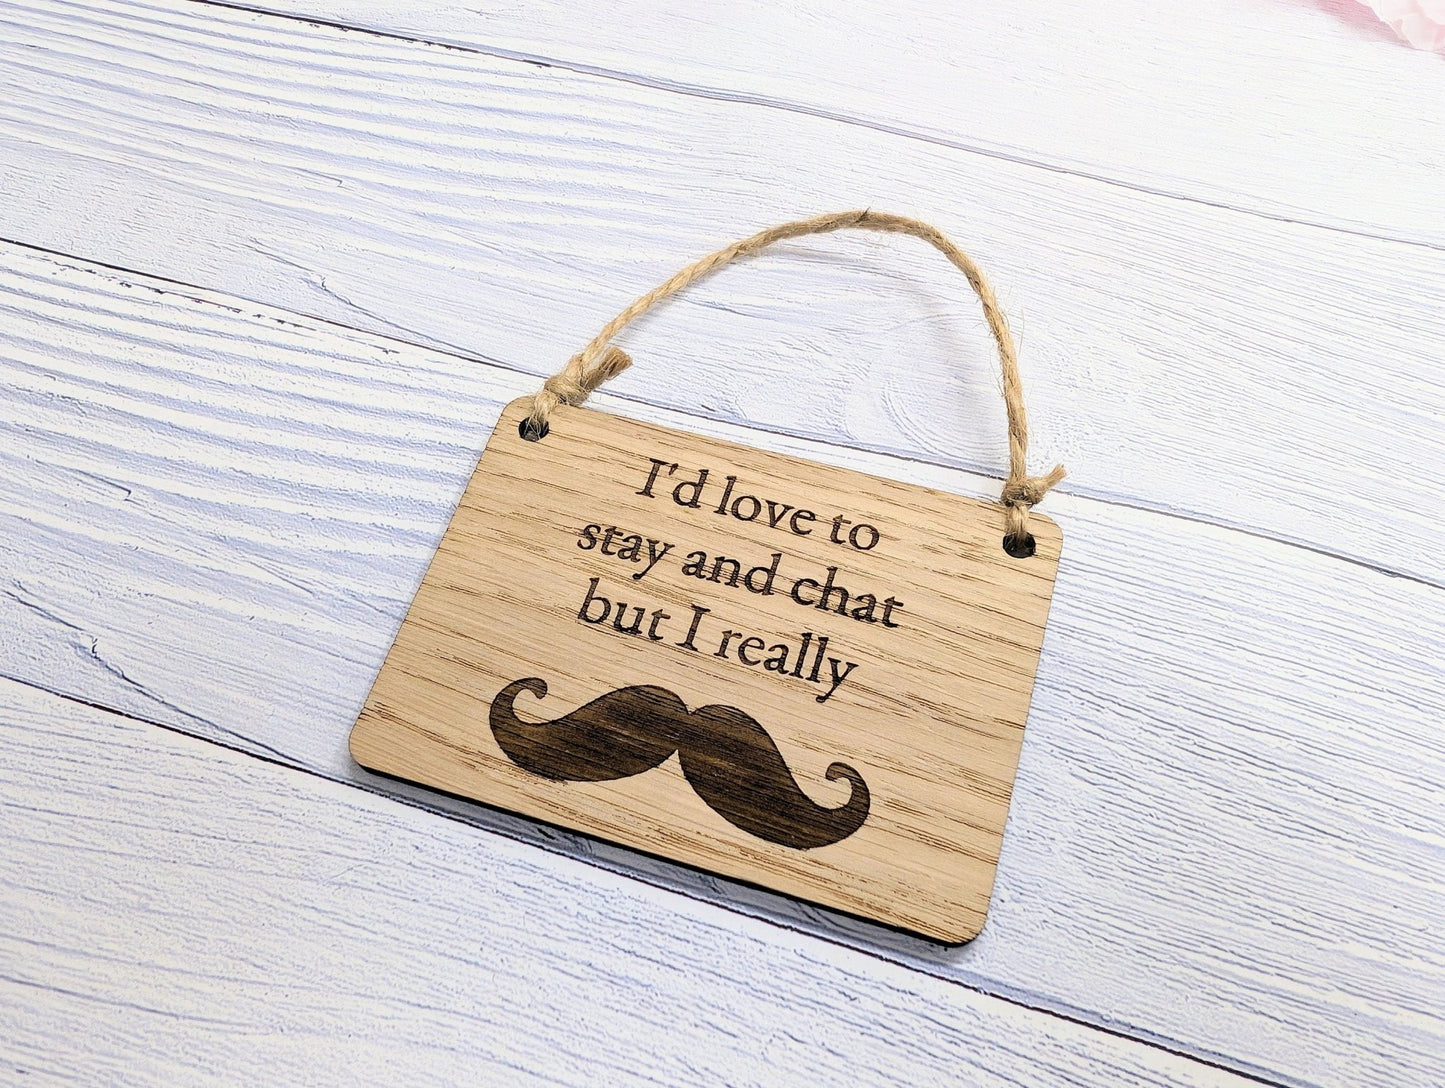 Wooden 'I'd Love to Stay and Chat But I Really Moustache' Sign - Witty Home Decor | Handcrafted in Wales, 4 Sizes Available - CherryGroveCraft